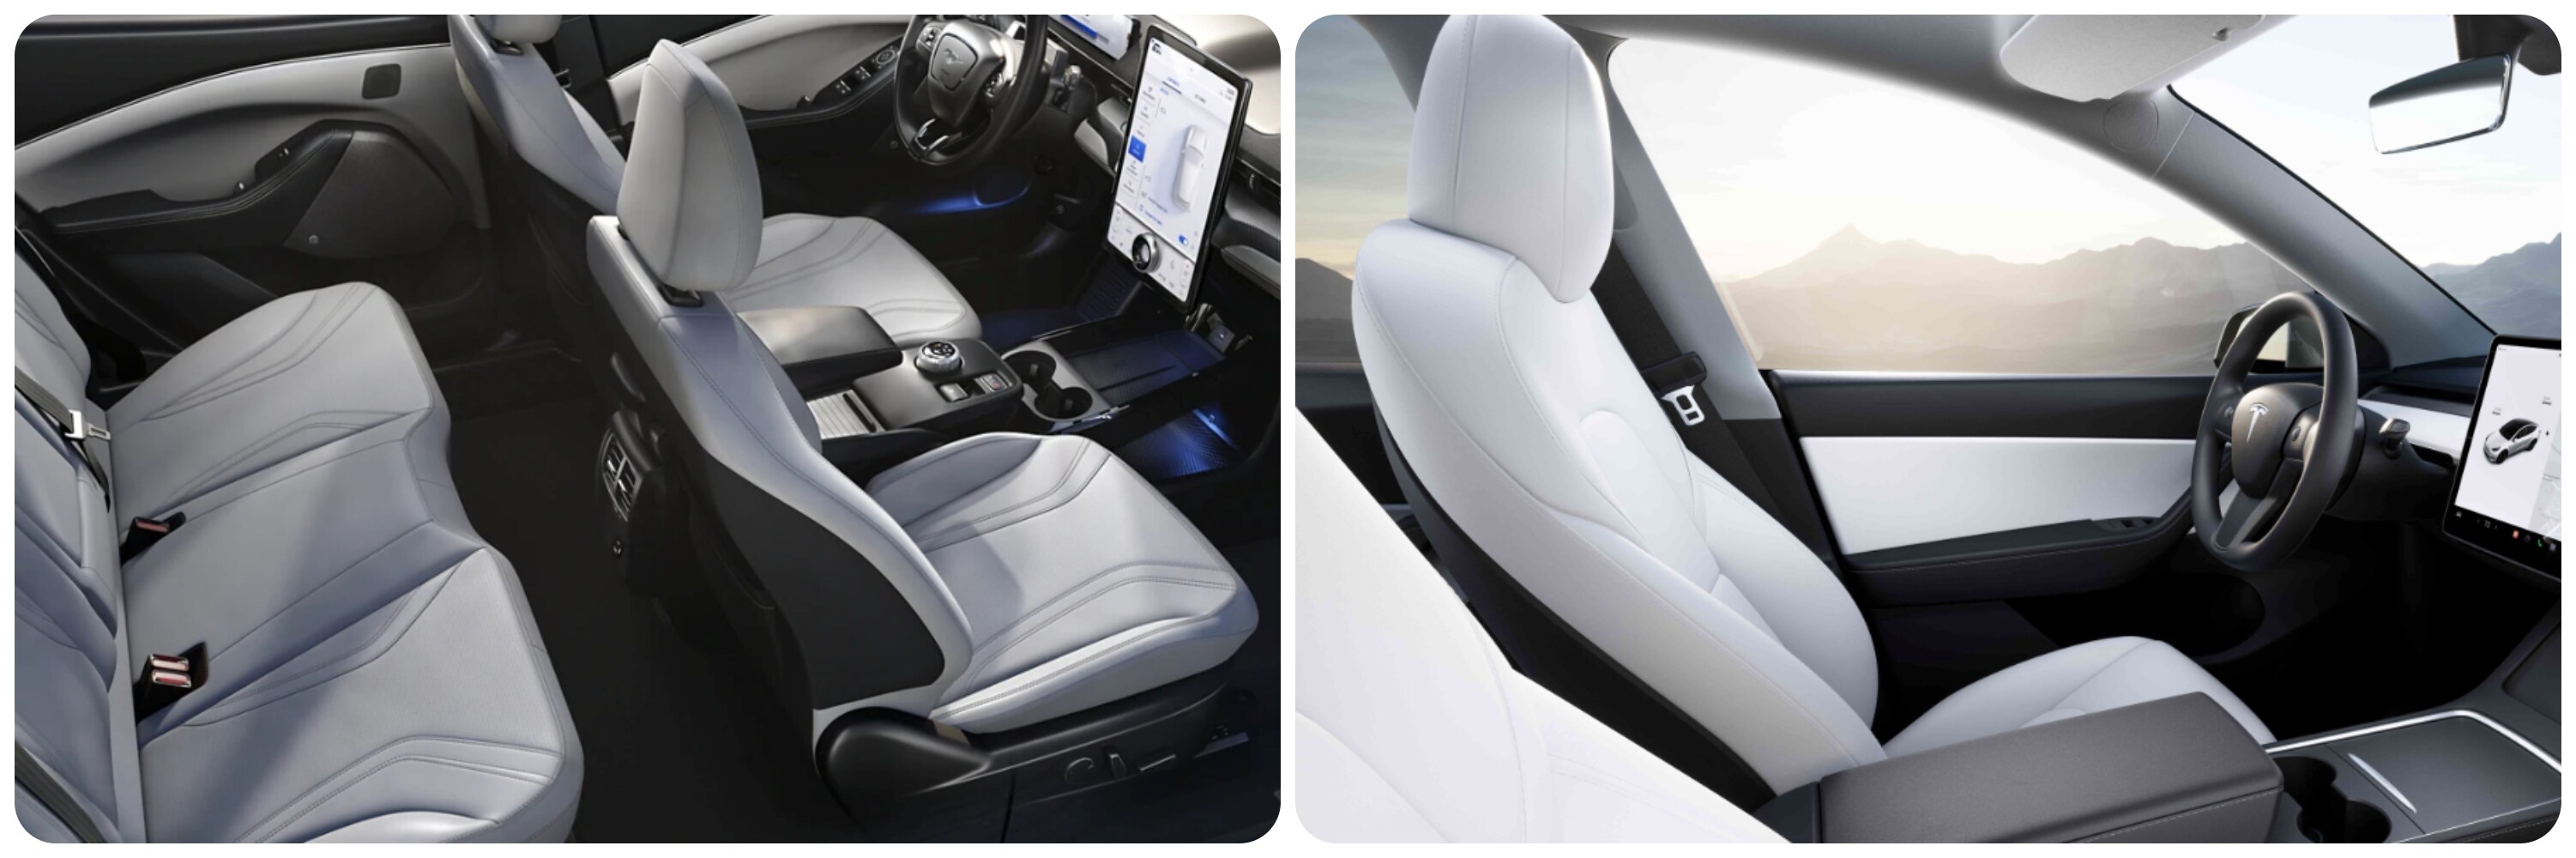 side-by-side-comparison-of-2022-ford-mustang-mach-e-and-tesla-model-y-interior-design